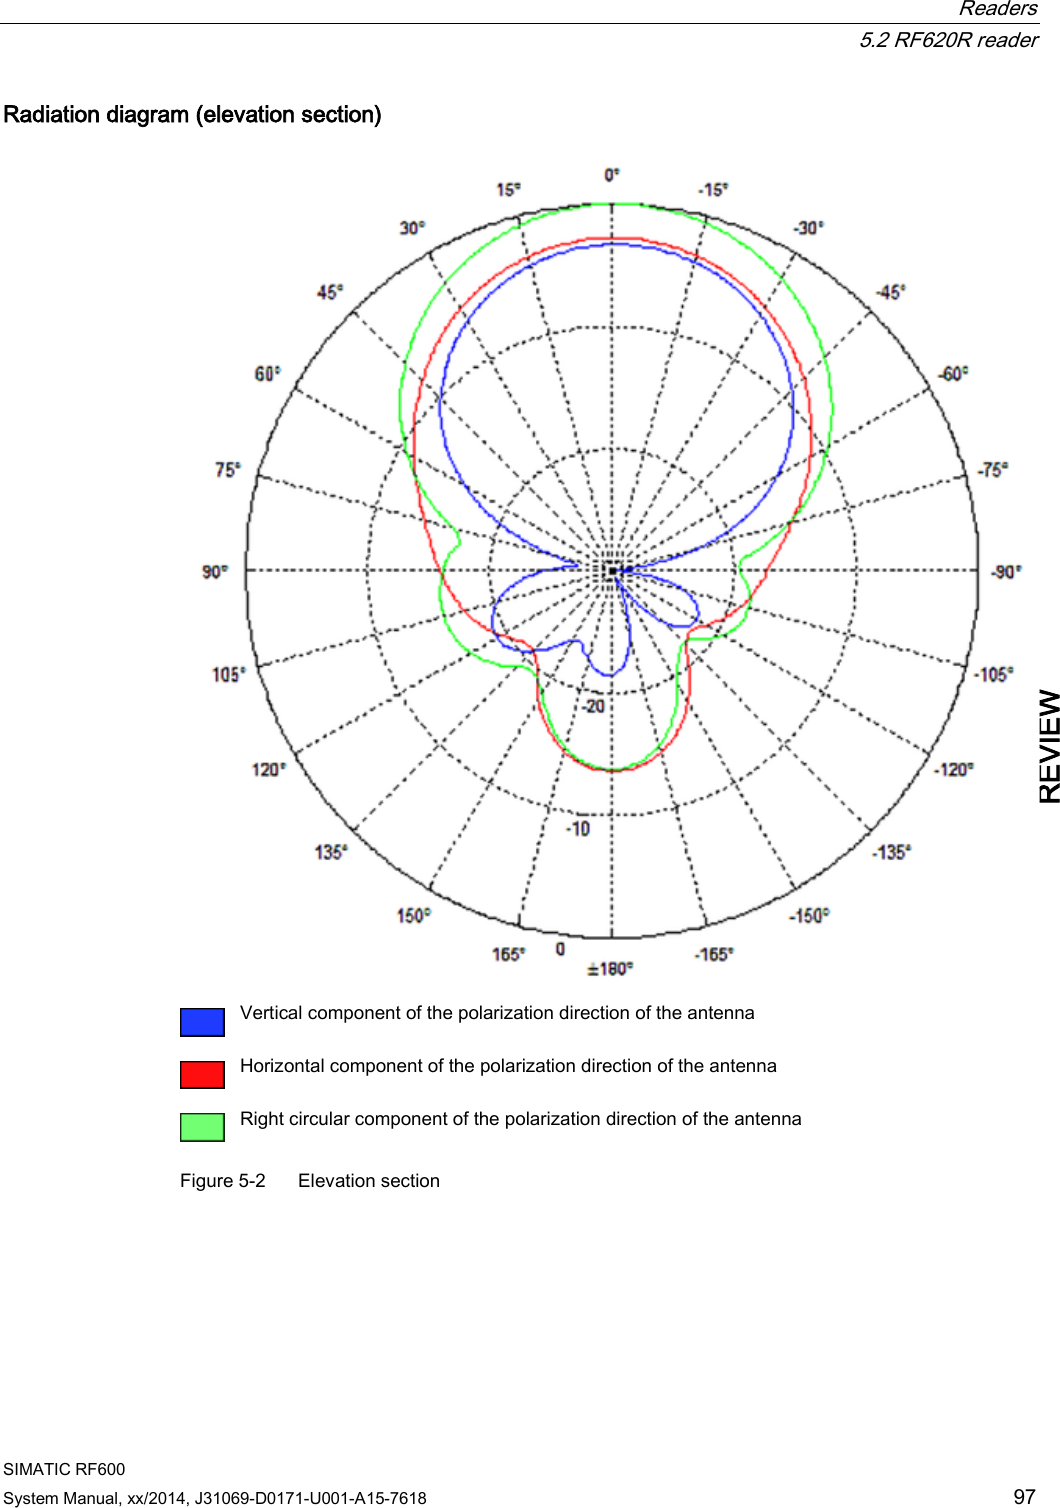  Readers  5.2 RF620R reader SIMATIC RF600 System Manual, xx/2014, J31069-D0171-U001-A15-7618 97 REVIEW Radiation diagram (elevation section)   Vertical component of the polarization direction of the antenna  Horizontal component of the polarization direction of the antenna  Right circular component of the polarization direction of the antenna Figure 5-2  Elevation section 